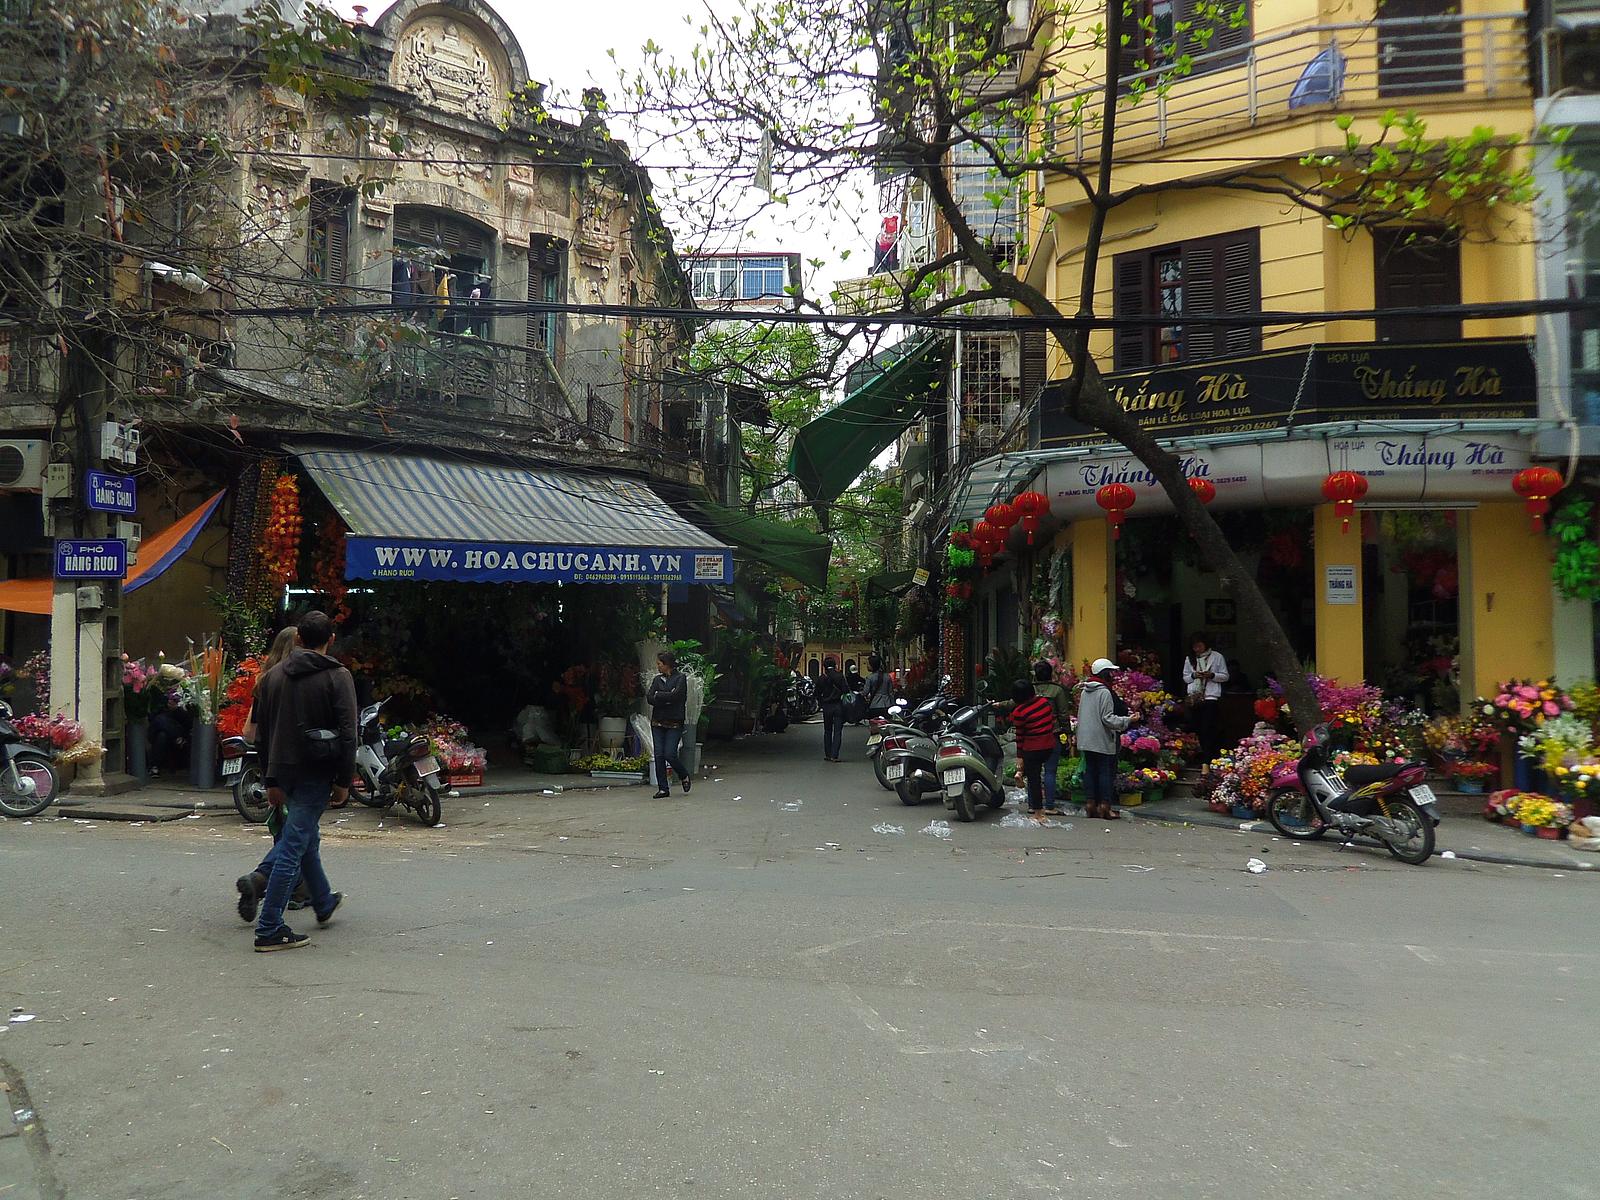 How does the Hanoi tourist cross the road? Very, very carefully